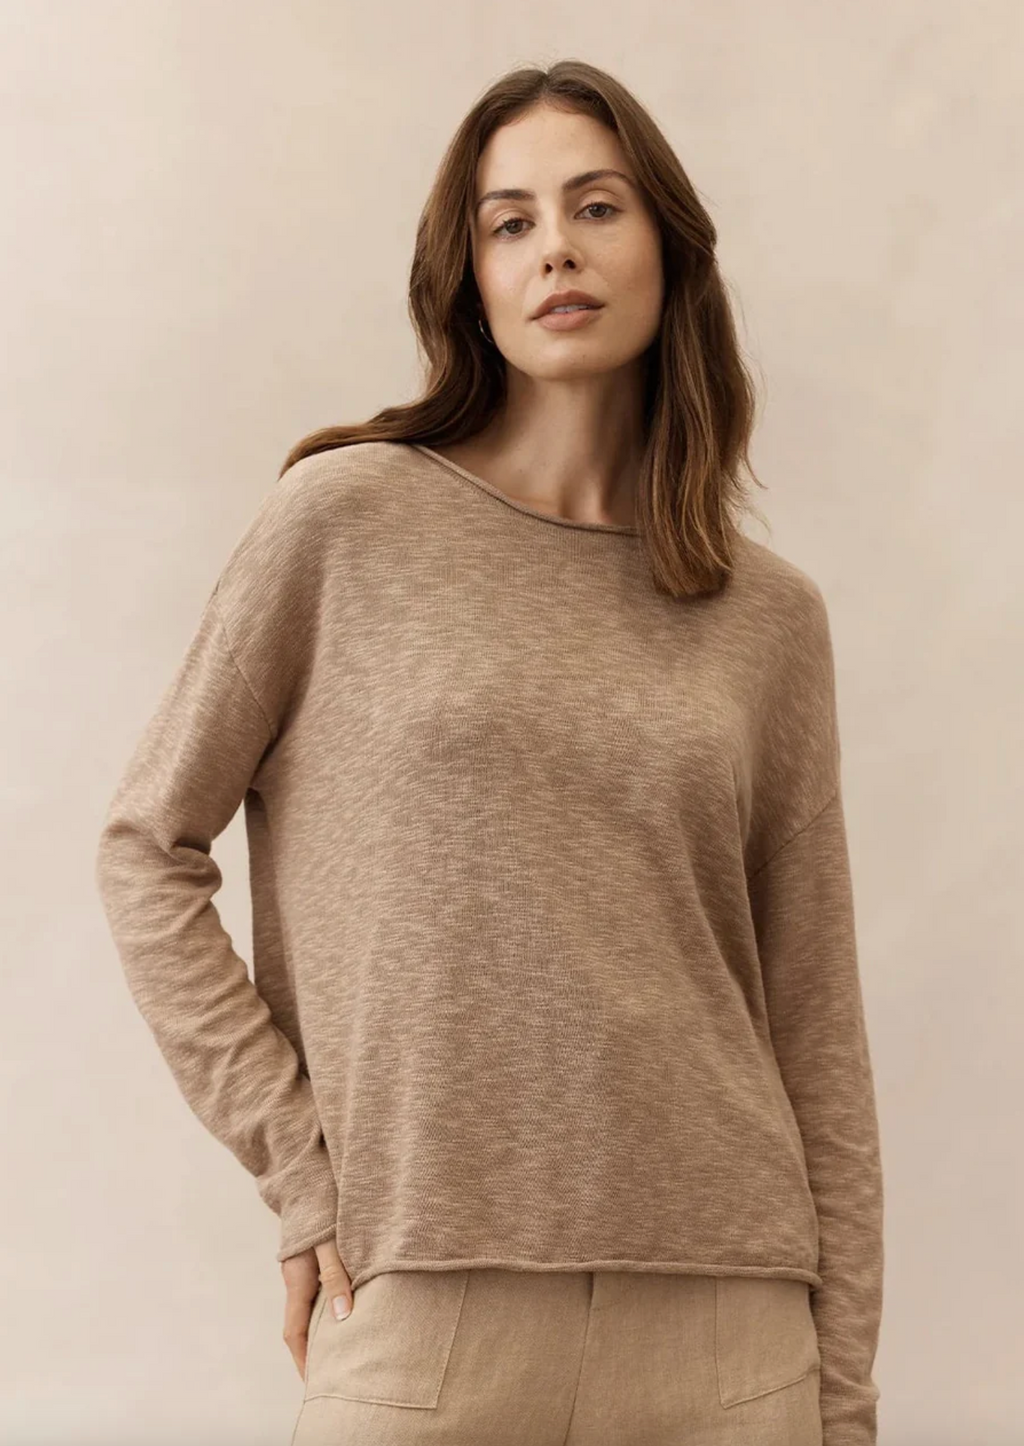 the nellie top by Little Lies is a long sleeve cotton slub weave textured top